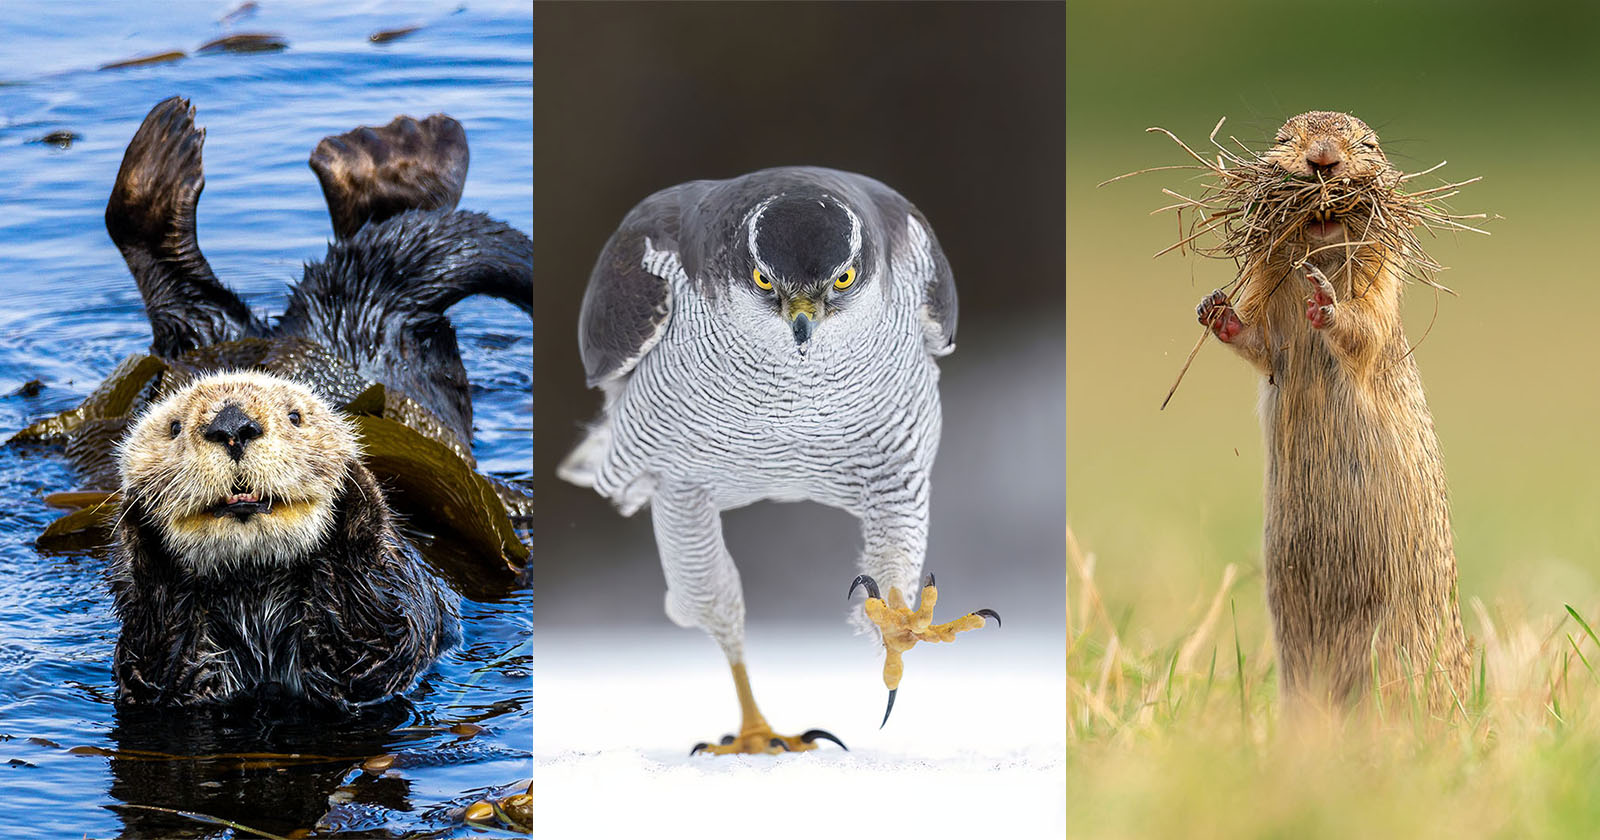 Nikon joins Comedy Wildlife Photo Awards -- otter, hawk, and squirrel